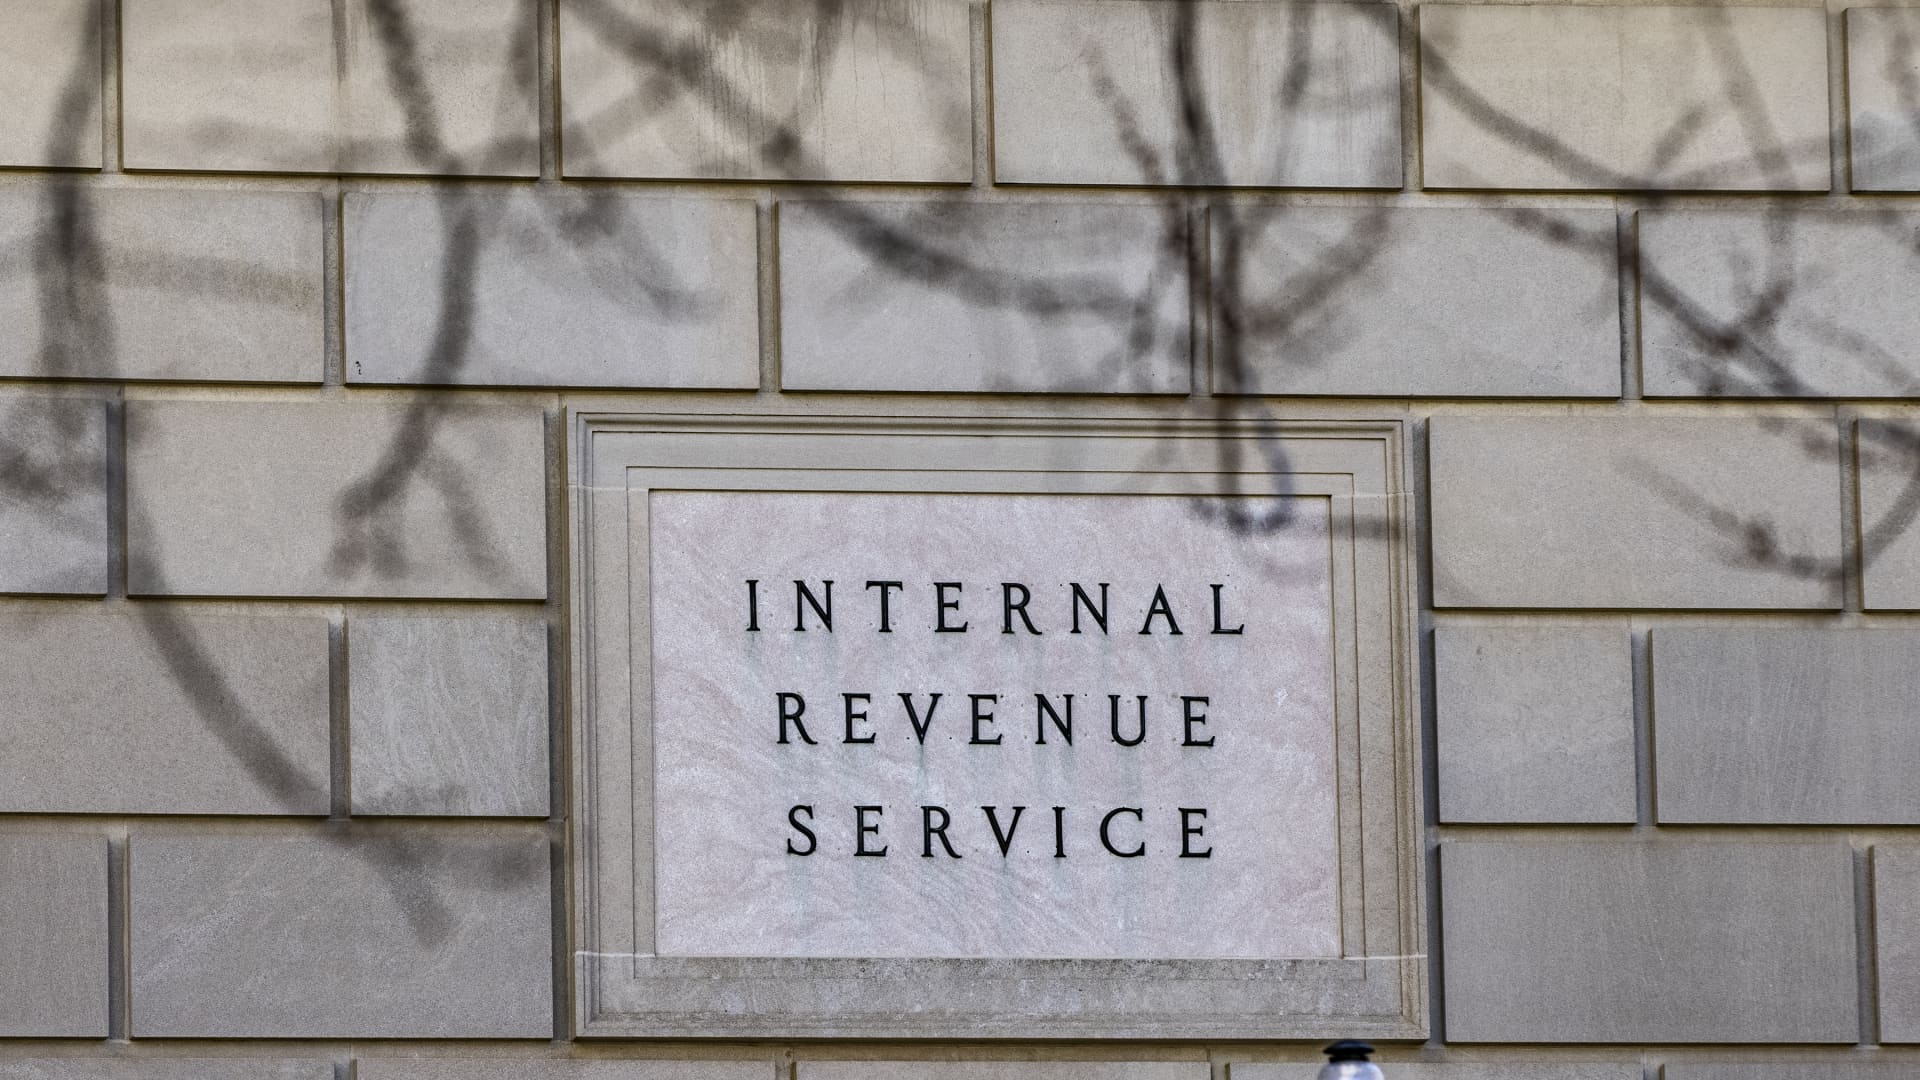 Signage outside the Internal Revenue Service (IRS) headquarters in Washington, D.C.